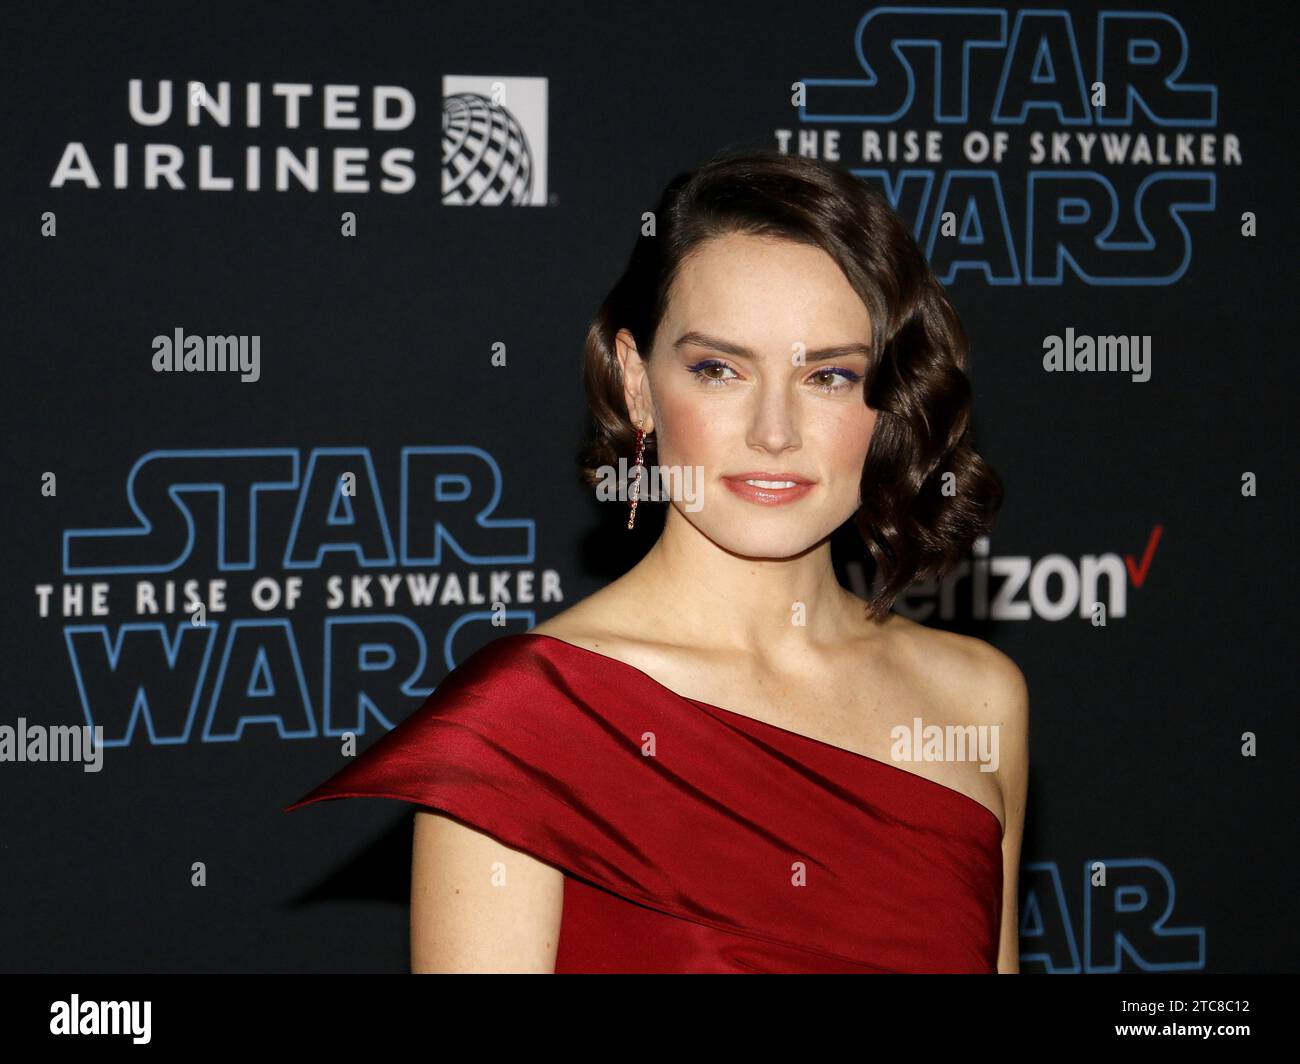 Daisy Ridley at the World premiere of Disney's 'Star Wars: The Rise Of Skywalker' held at the Dolby Theatre in Hollywood, USA on December 16, 2019 Stock Photo